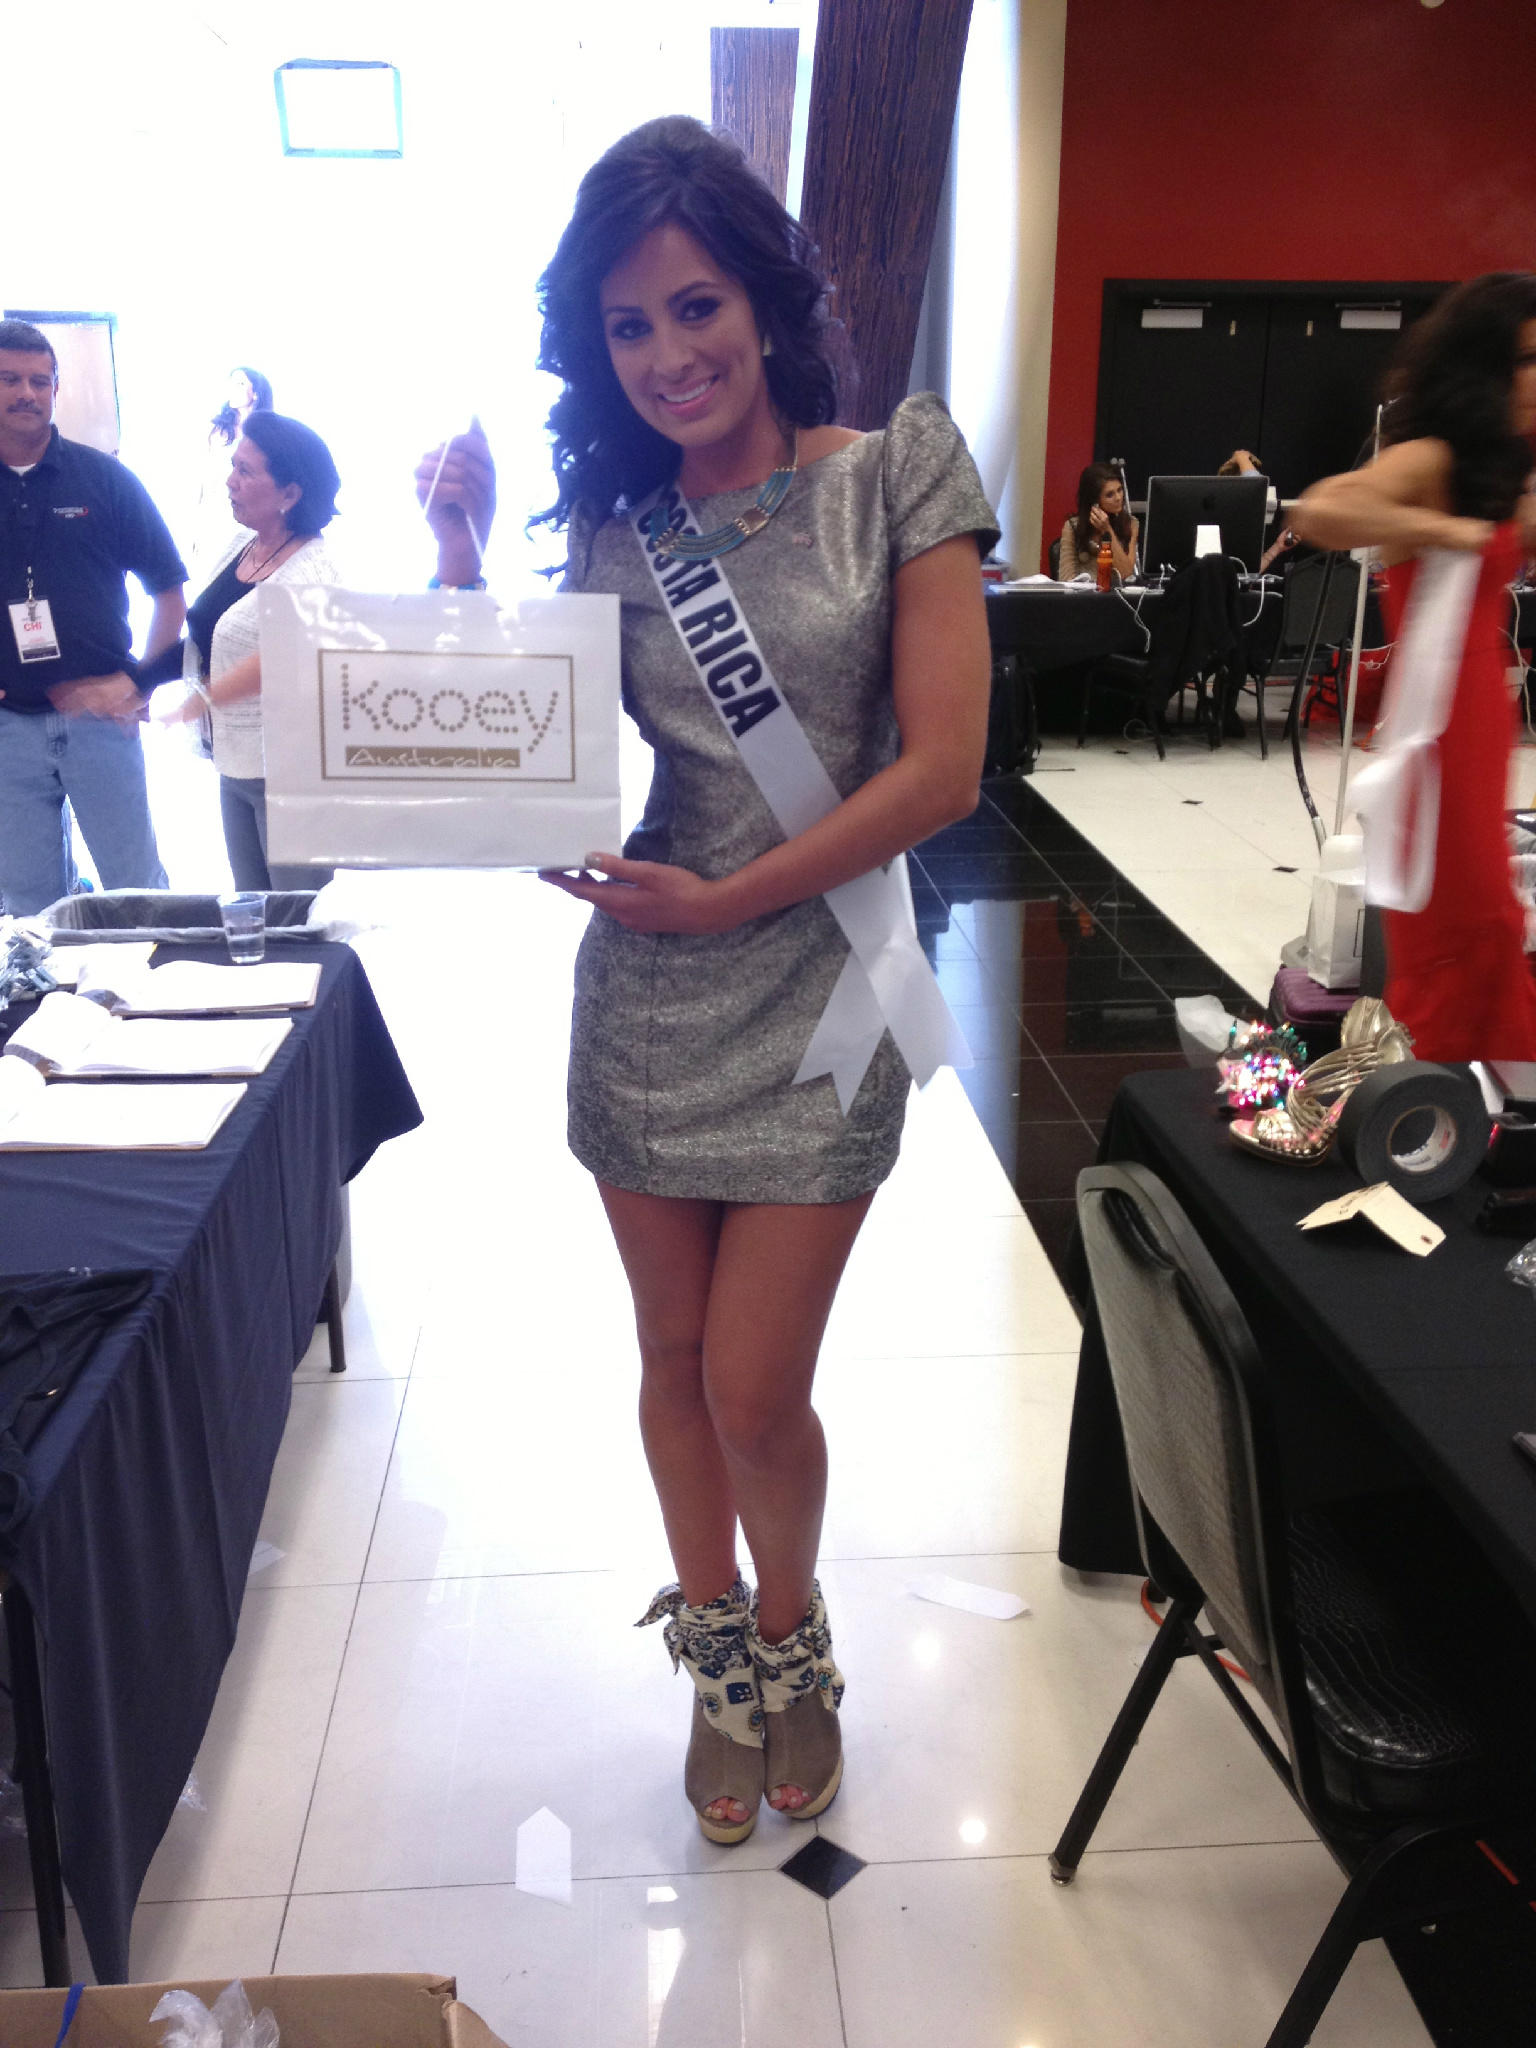 MISS UNIVERSE 2012 COVERAGE - AFTER THE PRELIMINARIES (The Heat is On!) - Page 9 A9OWVxfCMAEMdKo